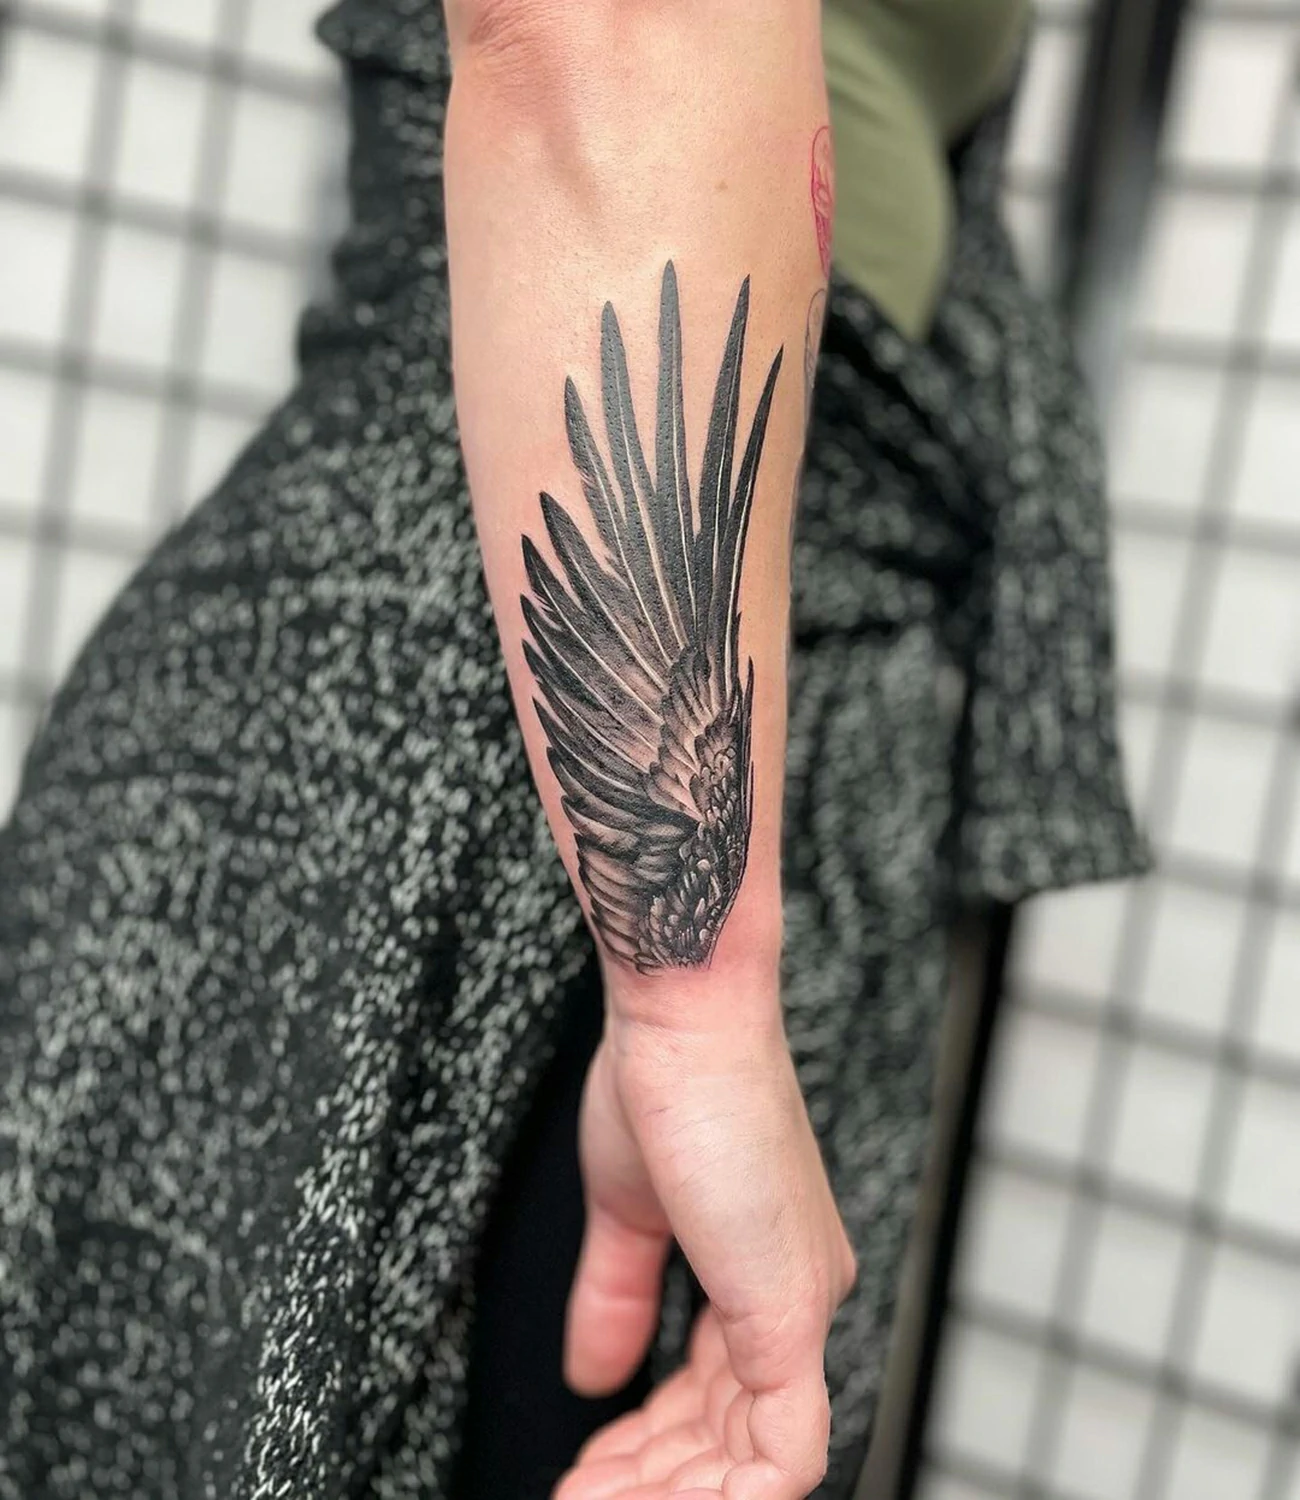 Raven wing tattoo: A tattoo emphasizing the detail and spread of a raven’s wings.